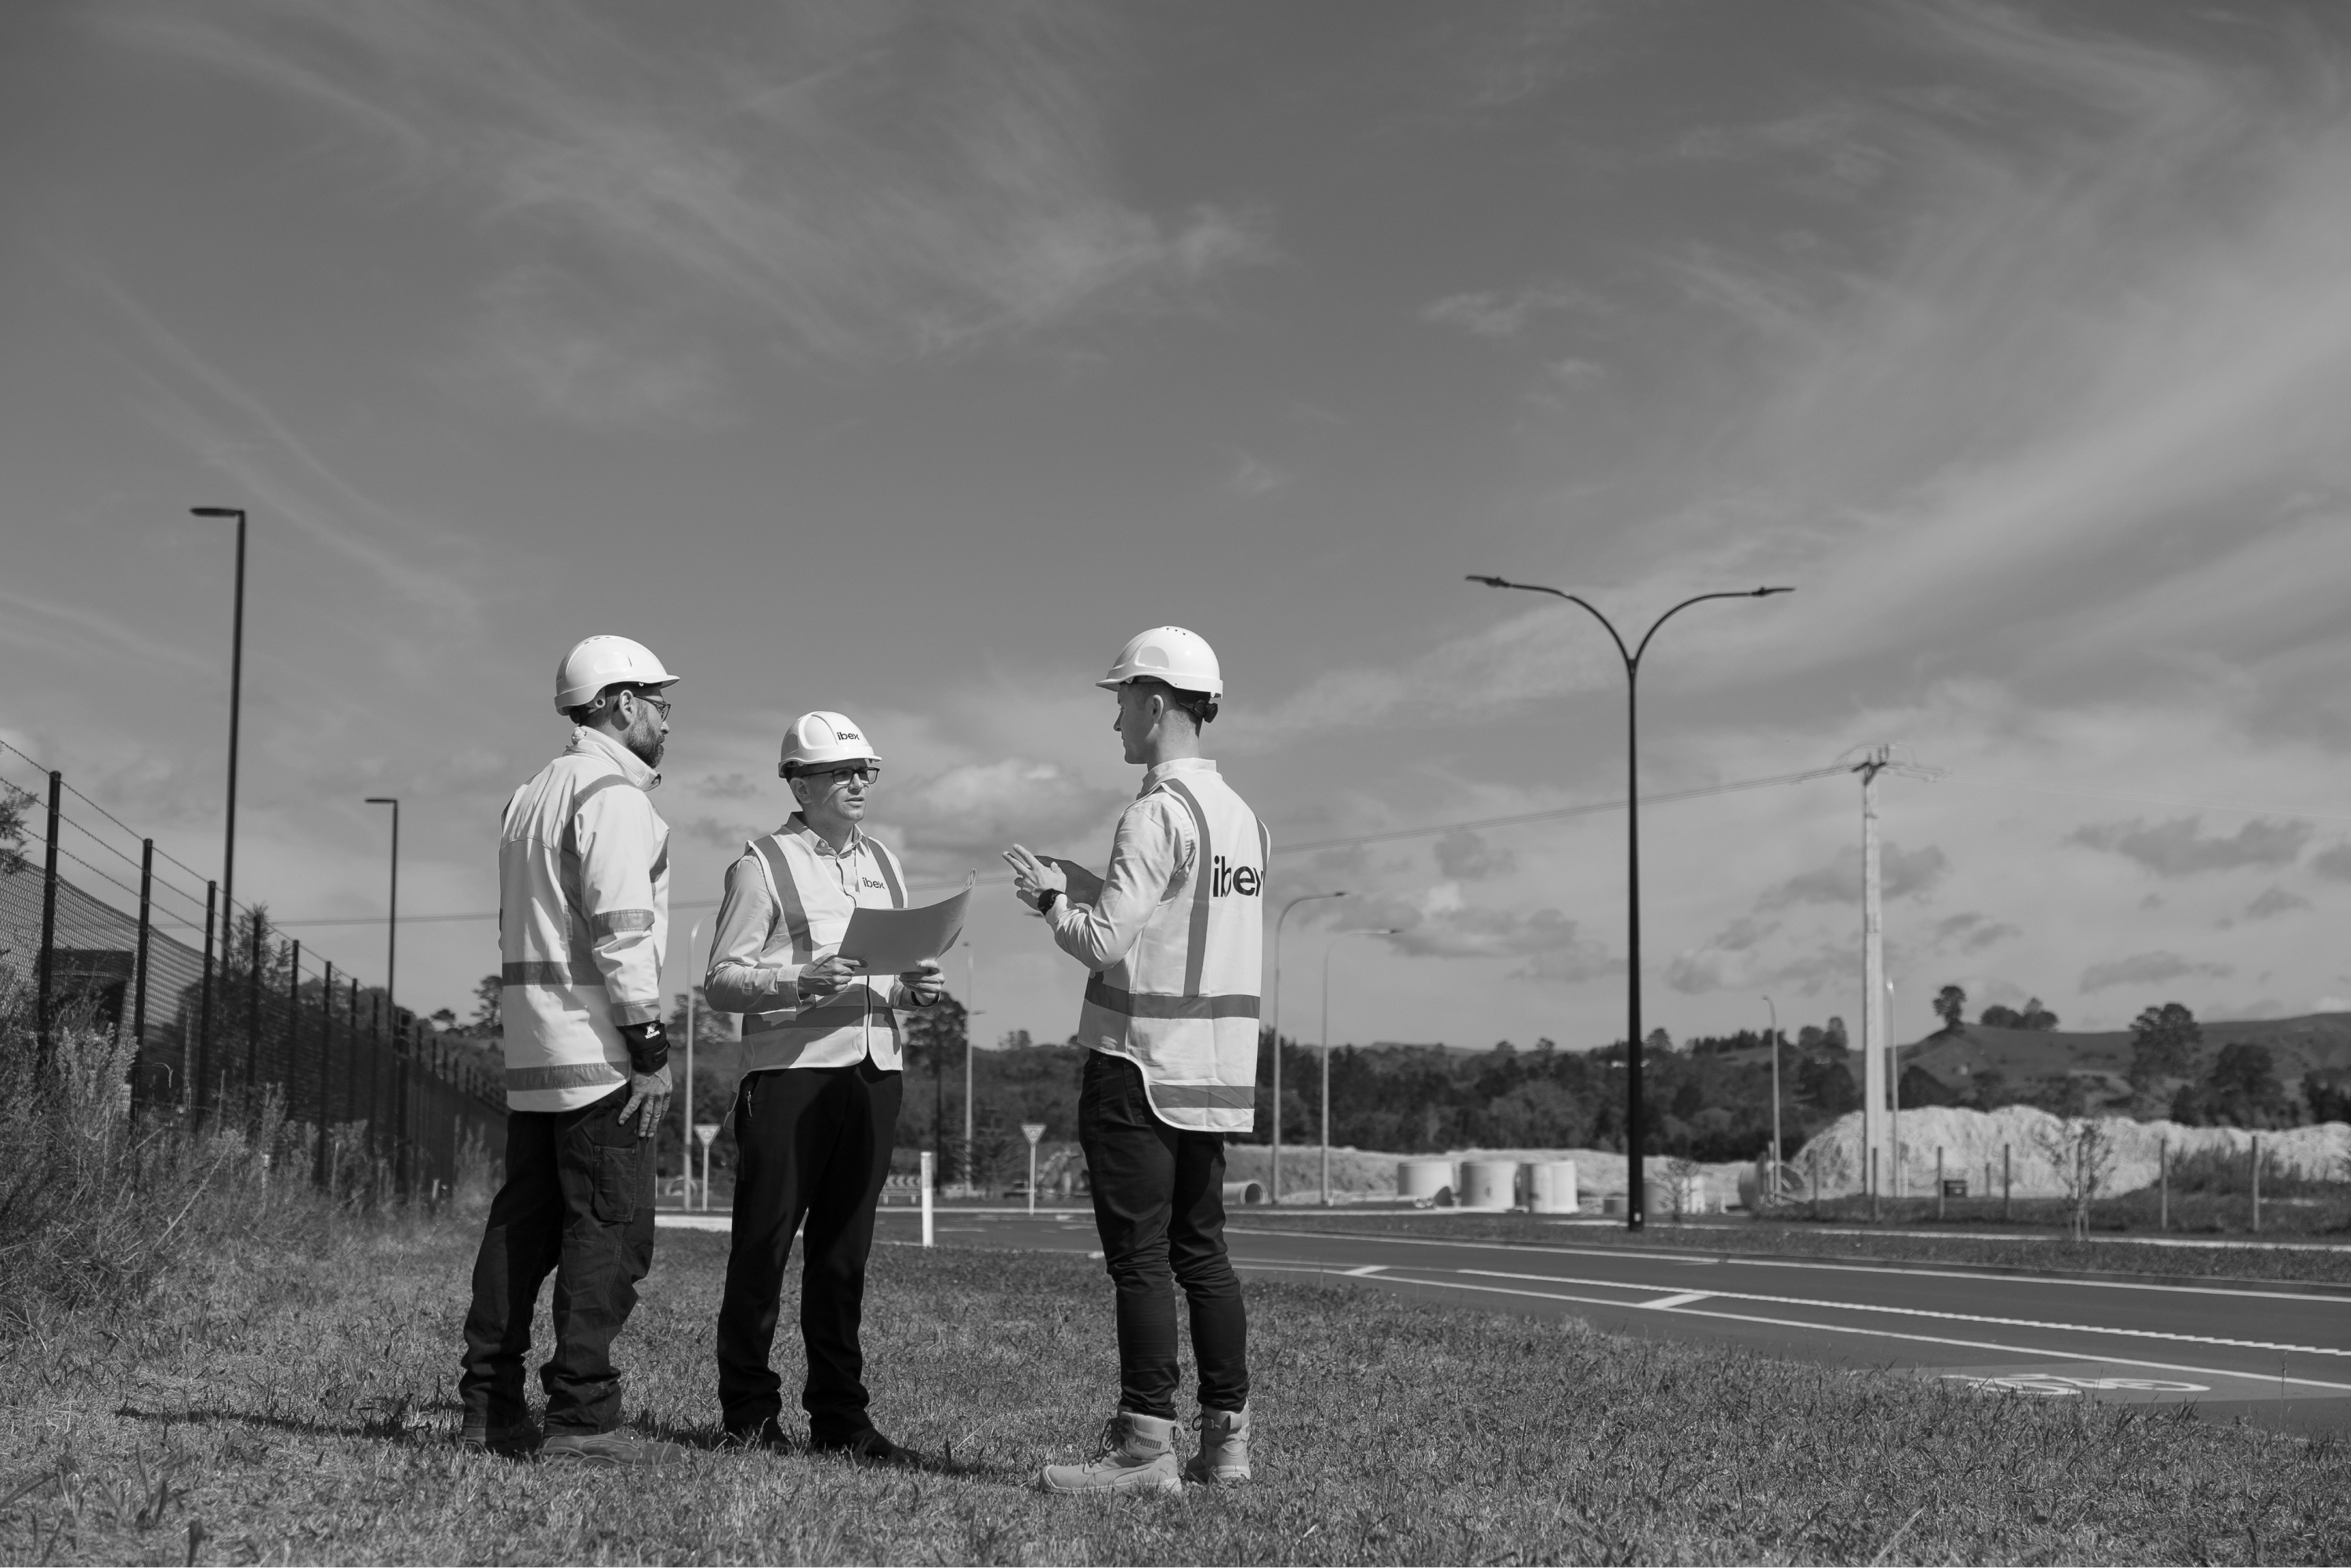 Three construction workers talking on a construction site illuminated by ibex Lighting.